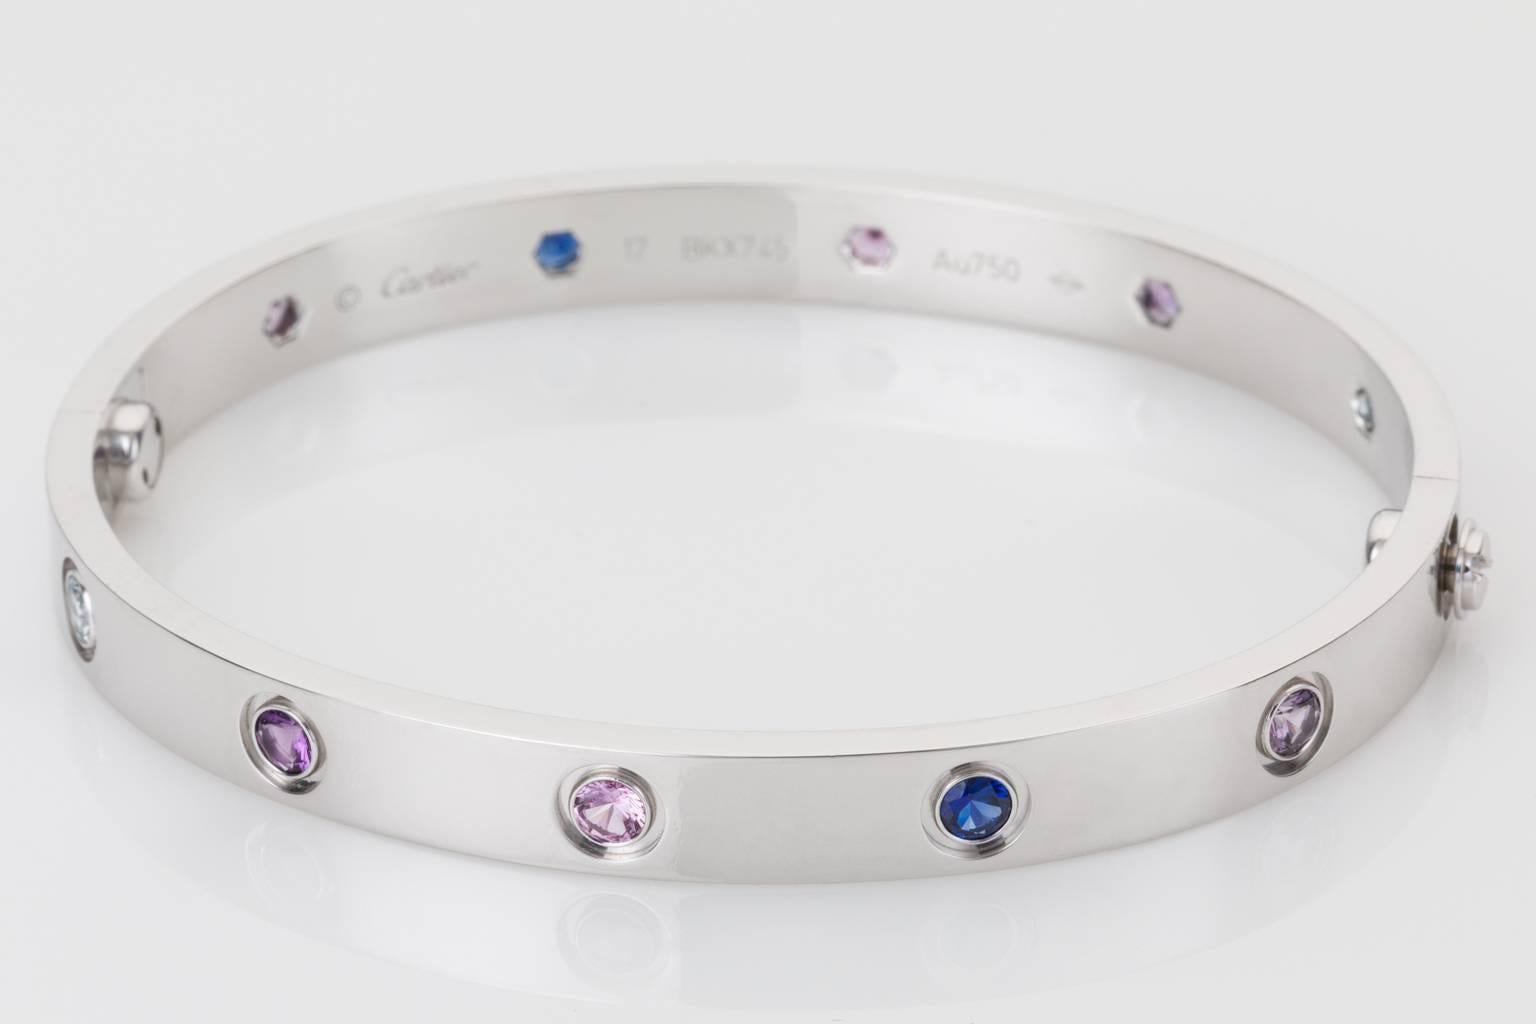 Contemporary, elegant & collectable this 18k white gold Cartier love bangle is set with a total of ten gorgeous gemstones,  two aquamarines, two pink sapphires, two blue sapphires, two purple spinels and two amethysts and comes complete with the